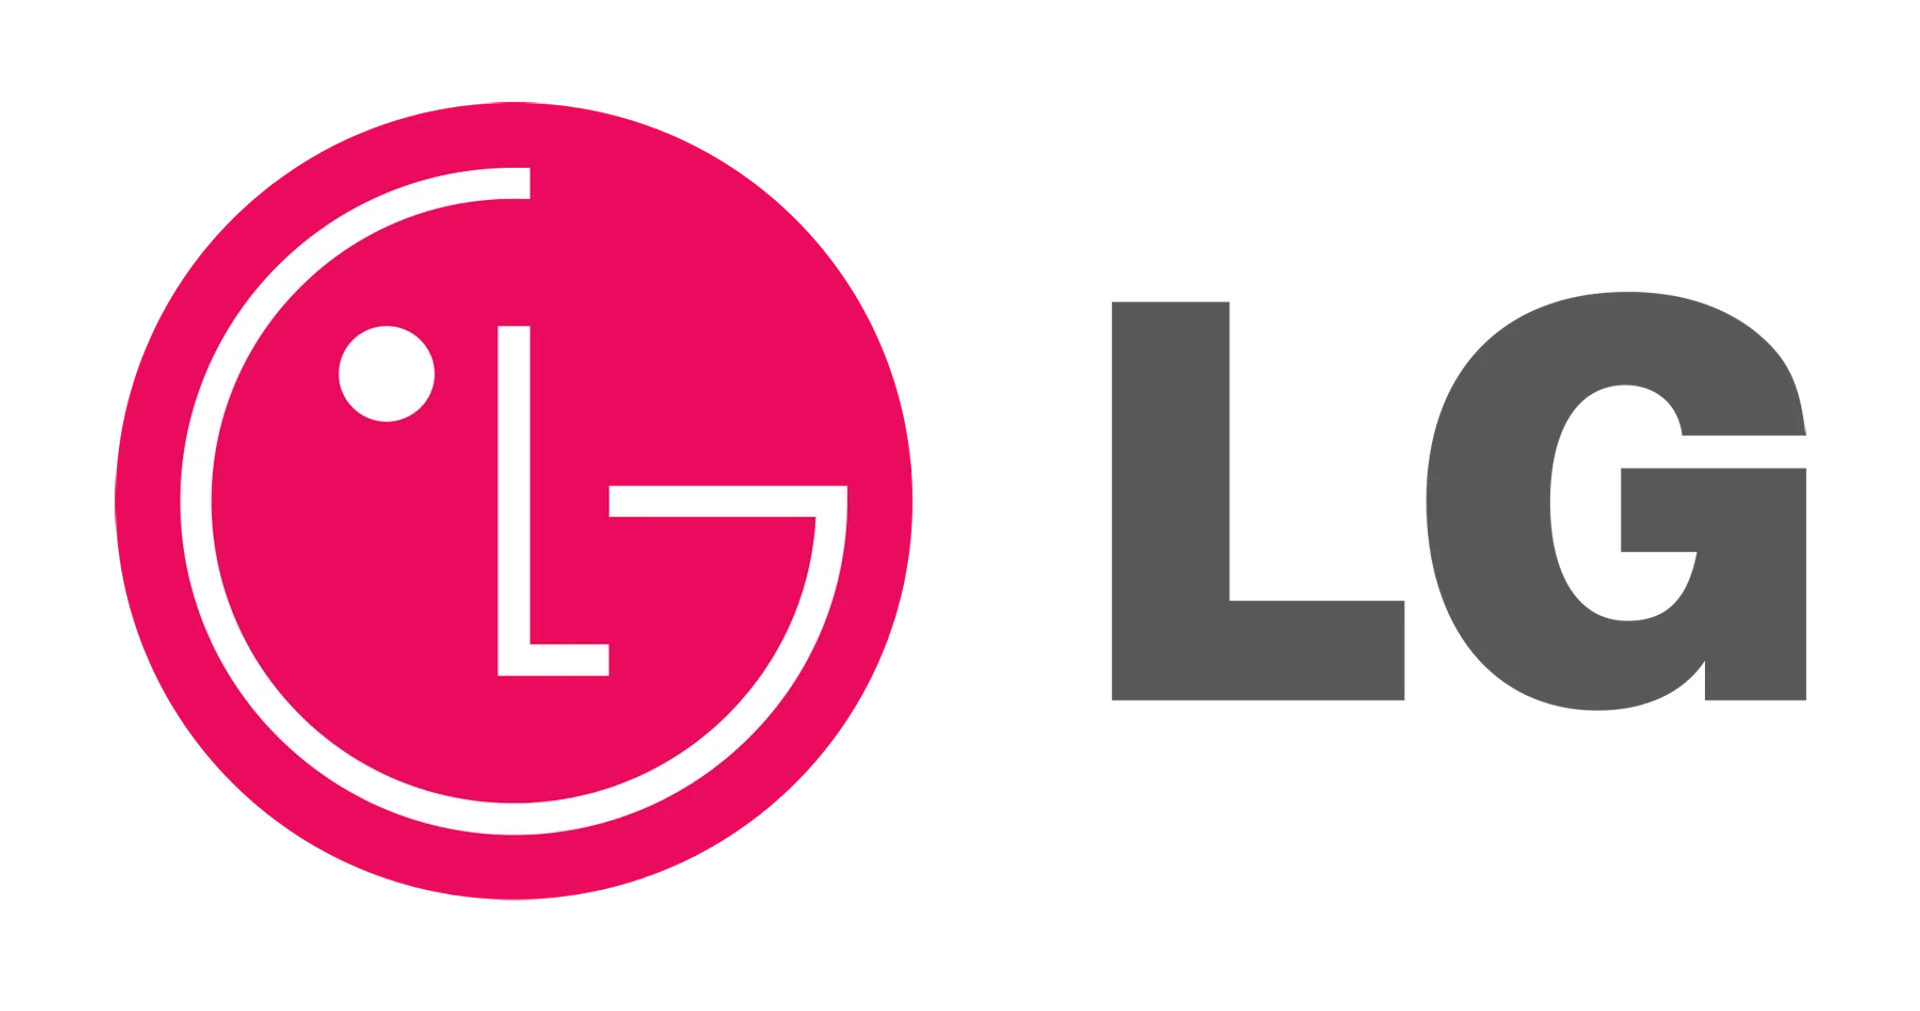 LG logo current weekly ad